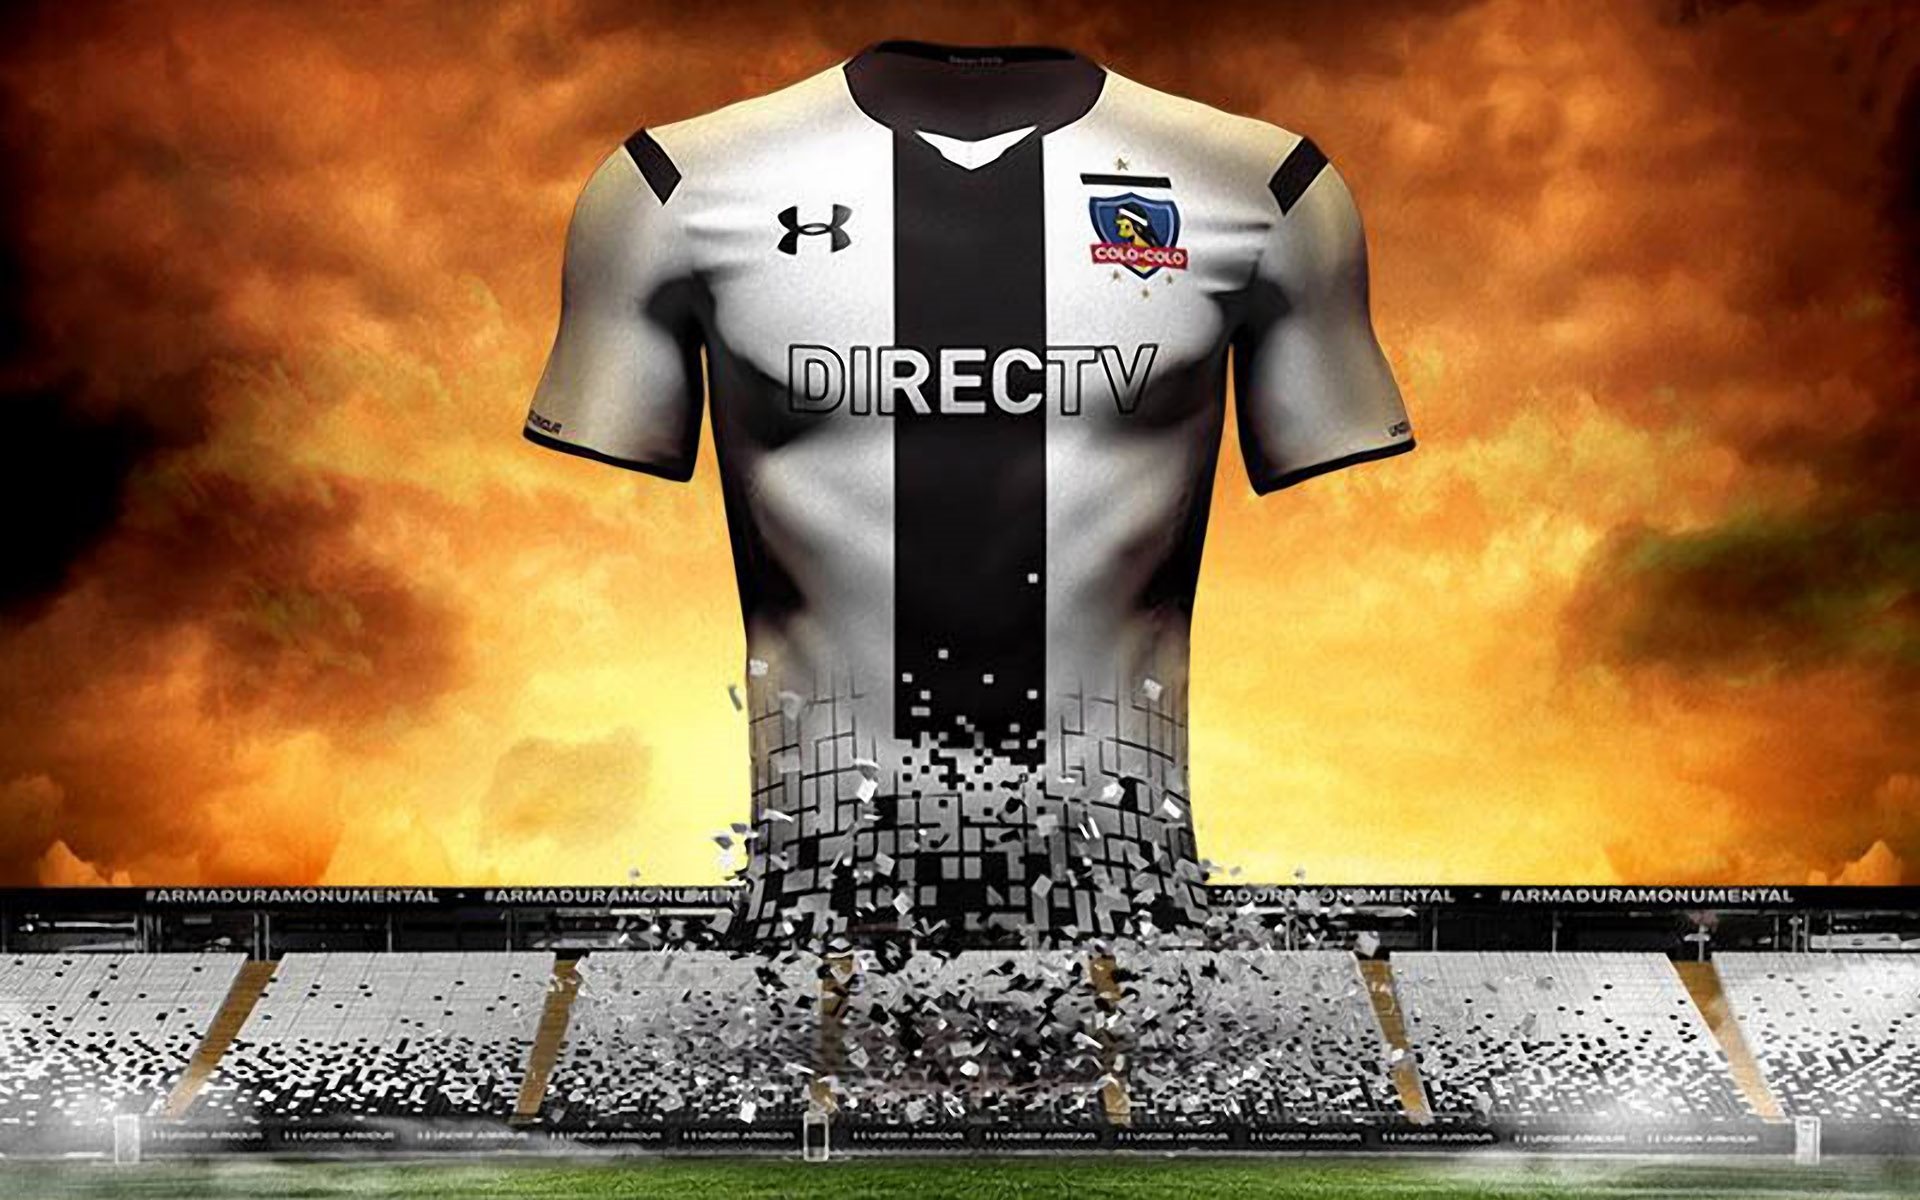 Download wallpaper under, armour home, colo colo, jersey, sports for desktop with resolution 1920x1200. High Quality HD picture wallpaper